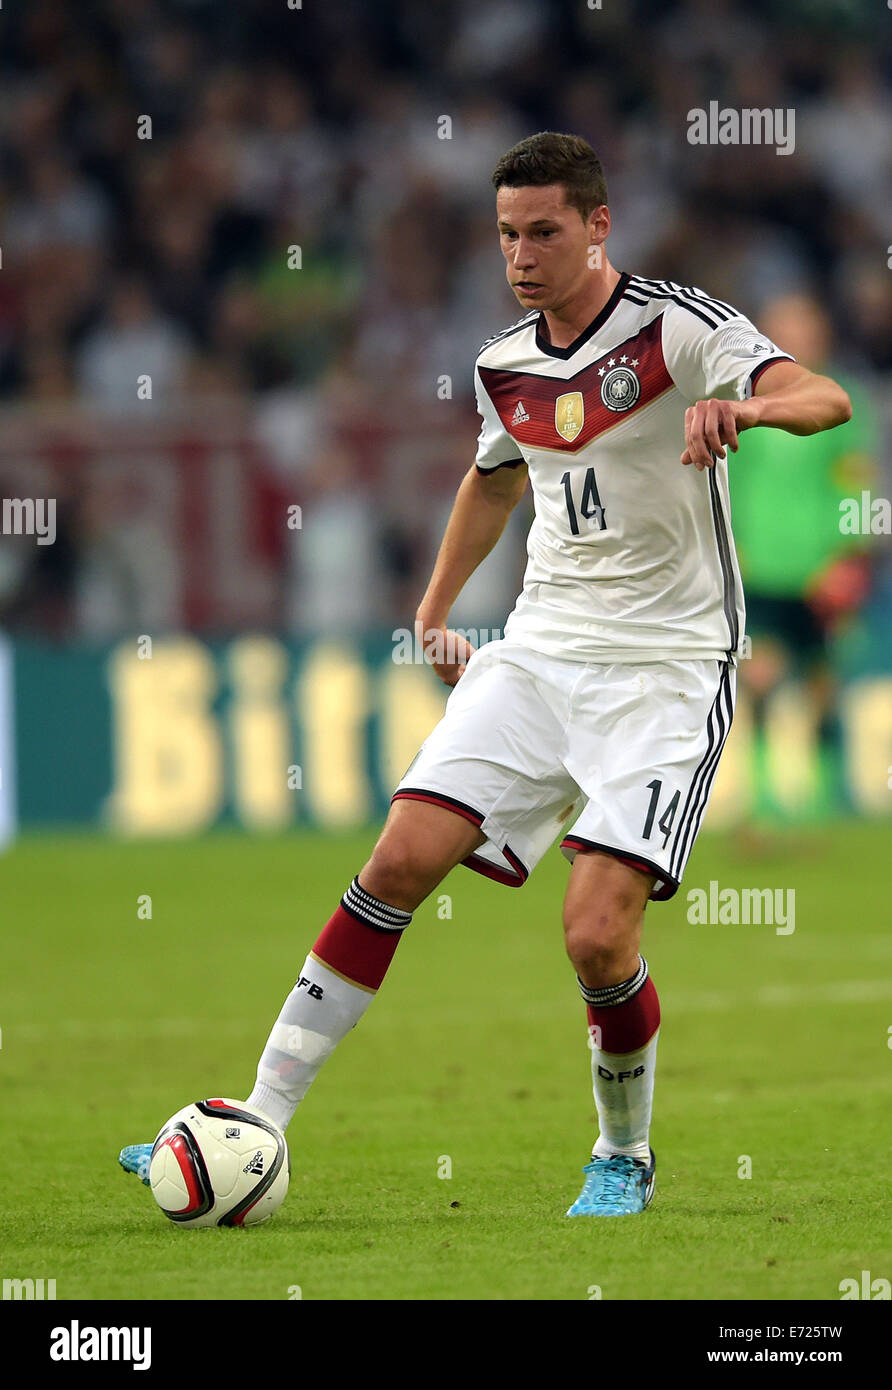 Duesseldorf, Germany. 03rd Sep, 2014. Germany's Julian Draxler vies for the ball during the international soccer match between Germany and Argentina at Esprit arena in Duesseldorf, Germany, 03 September 2014. Photo: Federico Gambarini/dpa/Alamy Live News Stock Photo